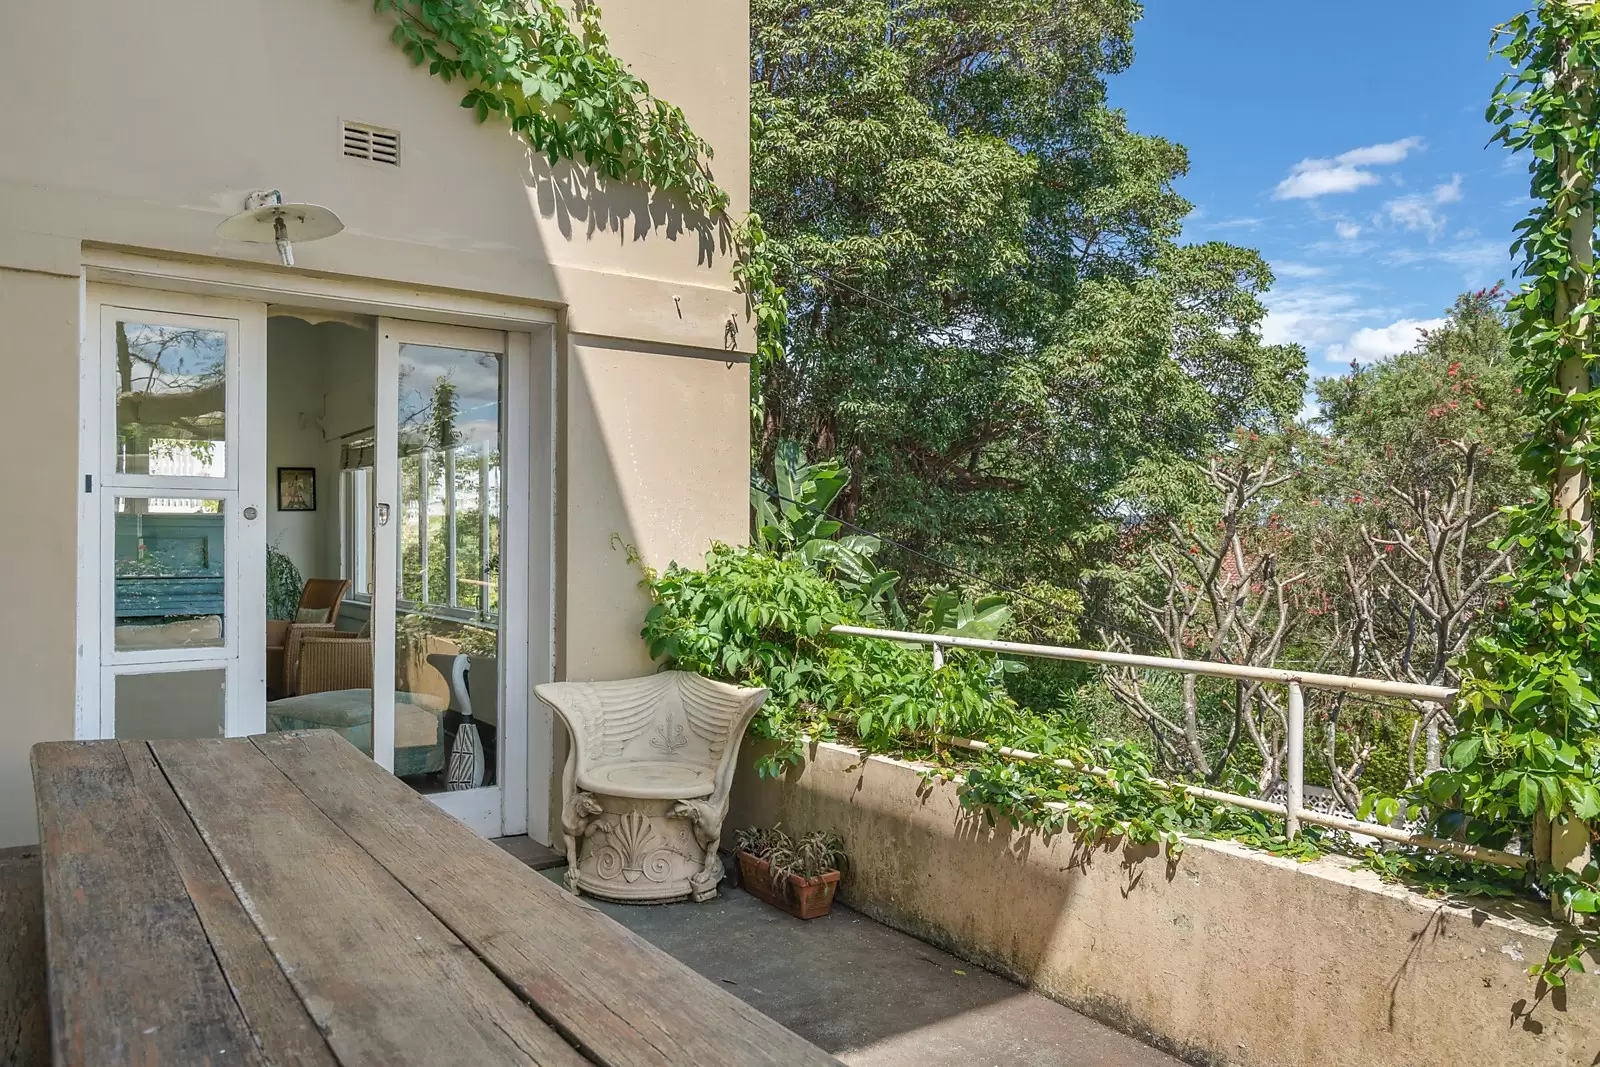 Photo #7: 41 Vaucluse Road, Vaucluse - Sold by Sydney Sotheby's International Realty